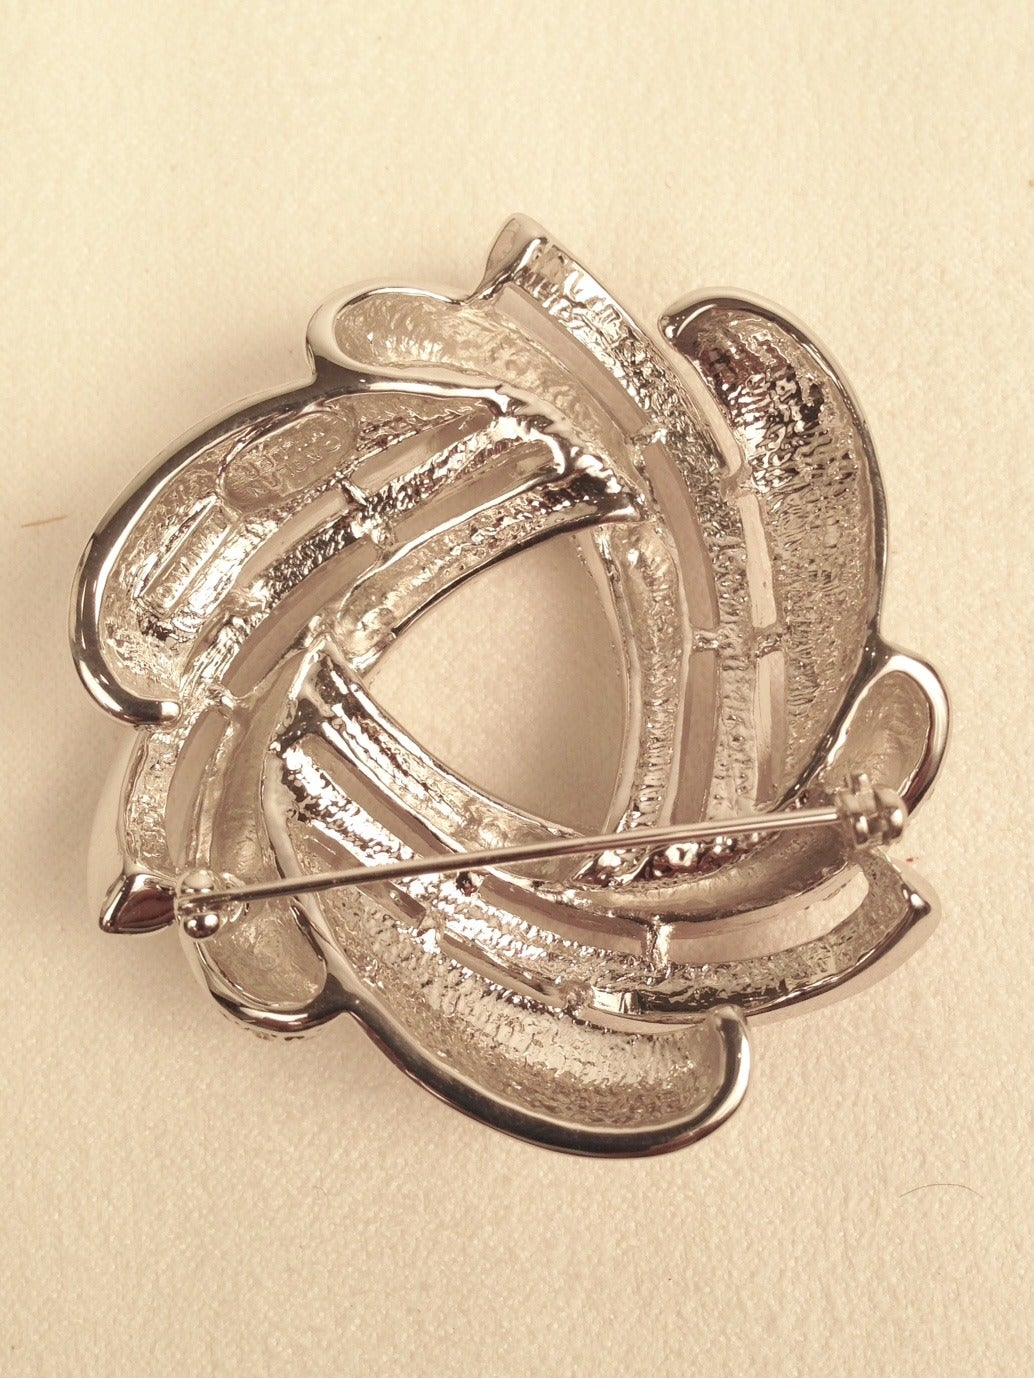 Nolan Miller Glamour Collection Pave Eternity Knot Brooch In New Condition For Sale In Palm Beach, FL